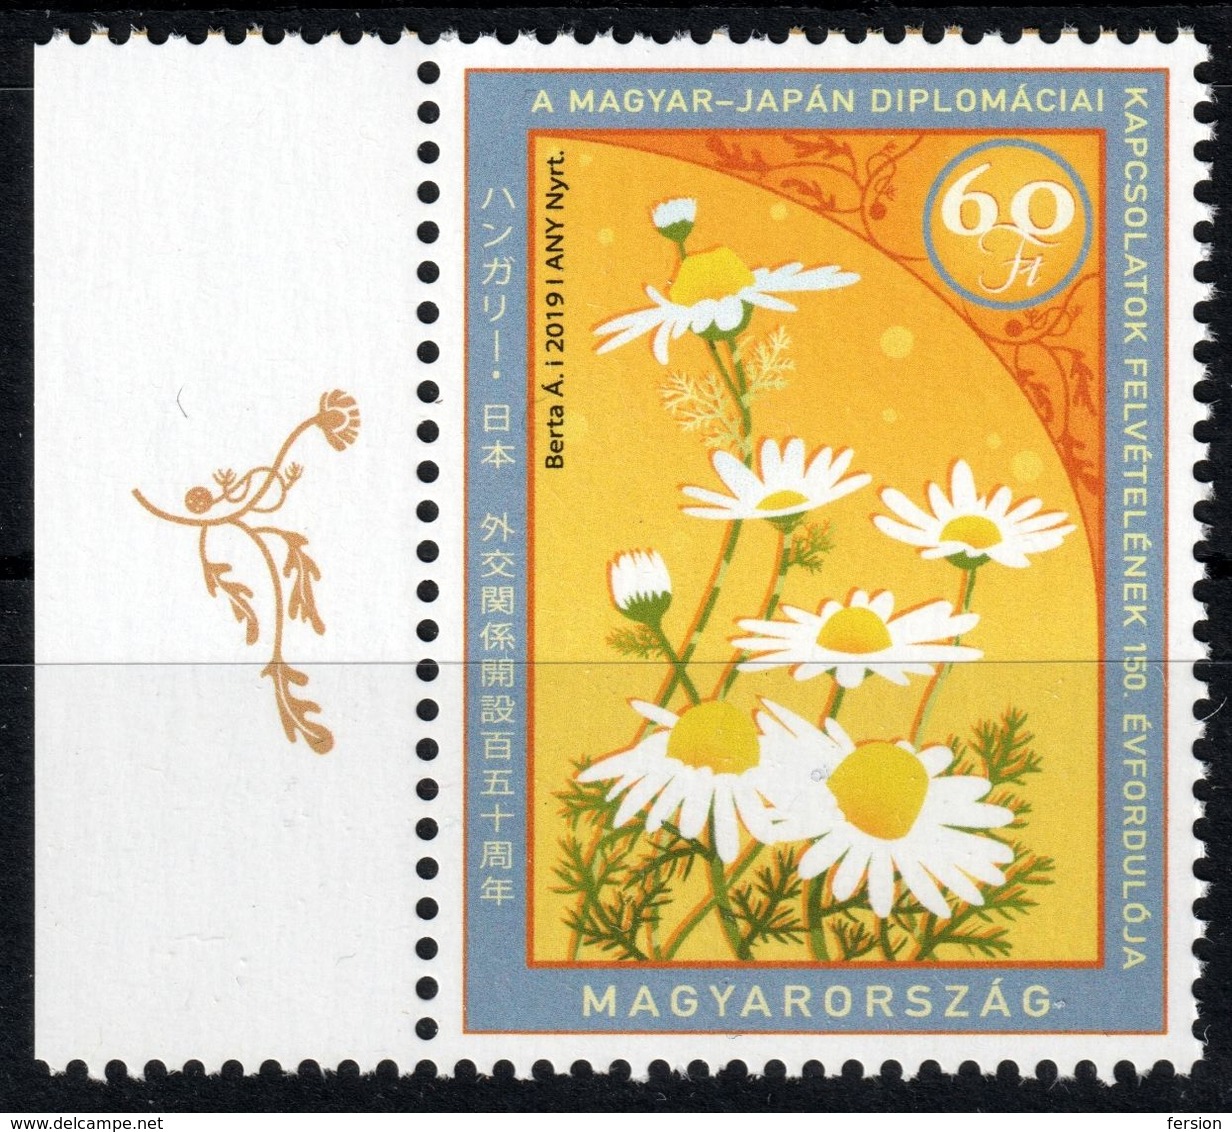 Herb Medicinal FLOWER Chamomile HUNGARY JAPAN Joint Issue 2019 - 200th Anniv. Of Diplomacy MNH - Medicinal Plants